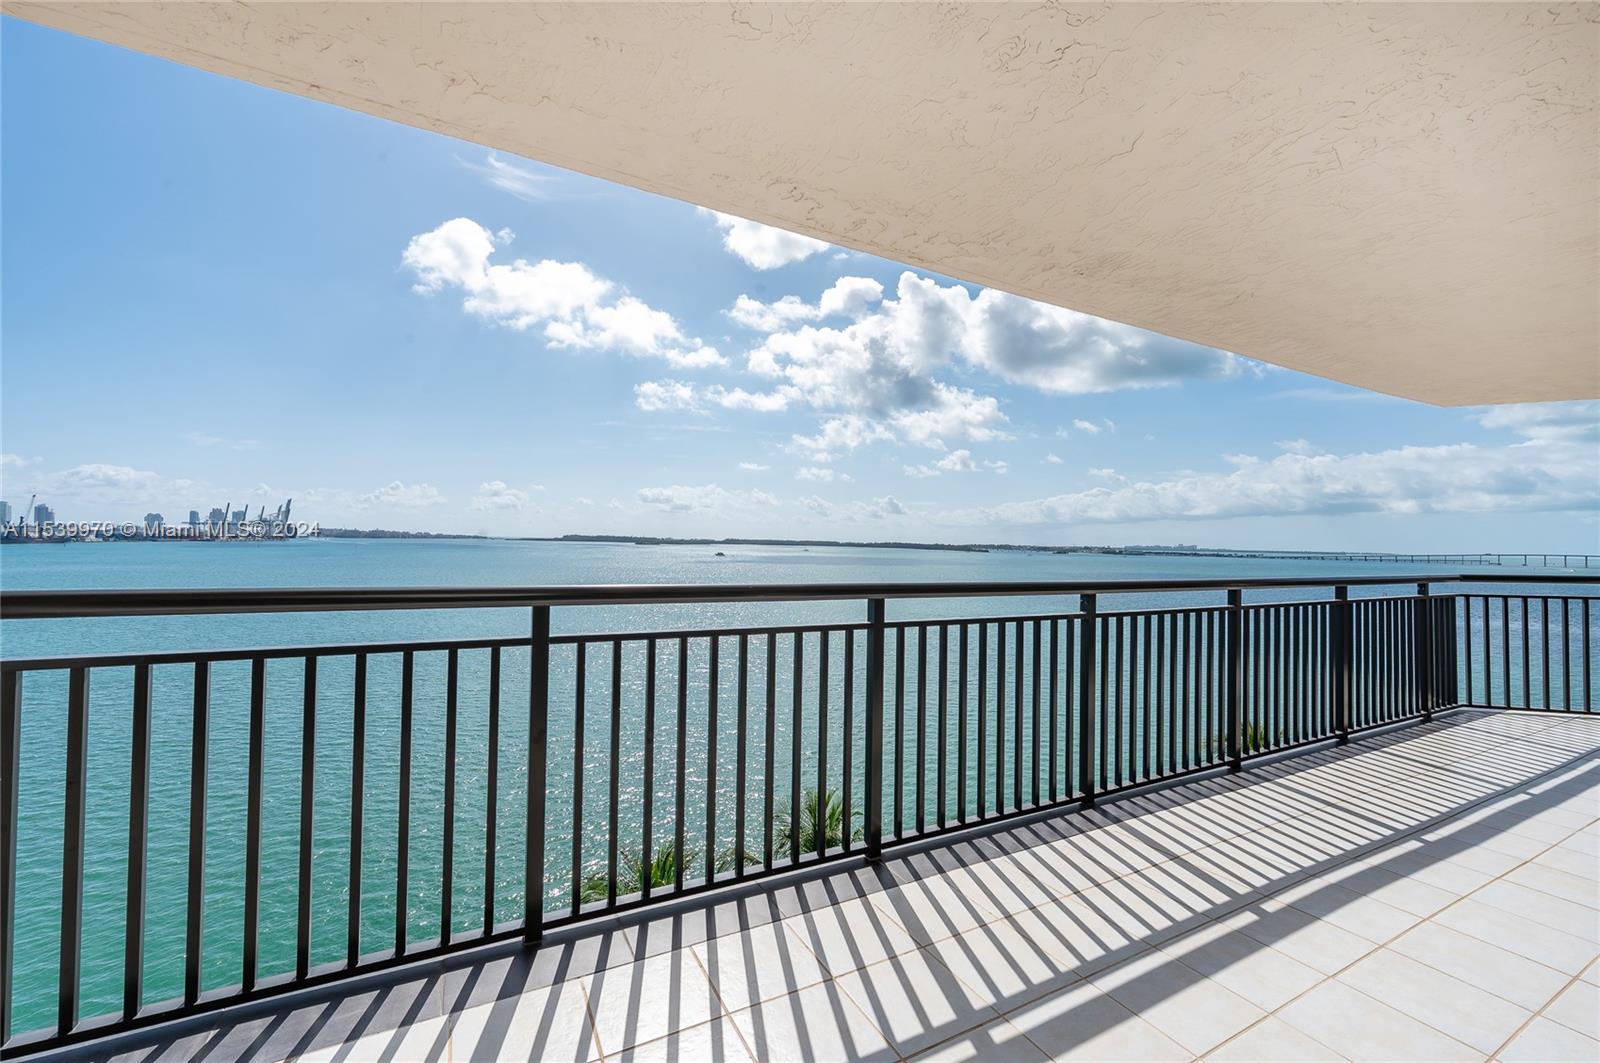 The most spectacular unobstructed view of Biscayne Bay from this corner unit, located in the best line of the building. 2 Bed / 2 Bath condo with 1,200 sq.ft. Recently painted, 2 ASSIGNED Parking Spaces, a spacious balcony, and Bay views from every room. Enjoy Brickell Key and its great location with immediate access to central Brickell and Brickell City Center with its excellent shops and restaurants, but Brickell Key offers a more relaxed lifestyle on this island. The building is going through upgrades & renovations, brand-new elevators have been installed, halls are being renovated, and much more. All this will increase the property value.